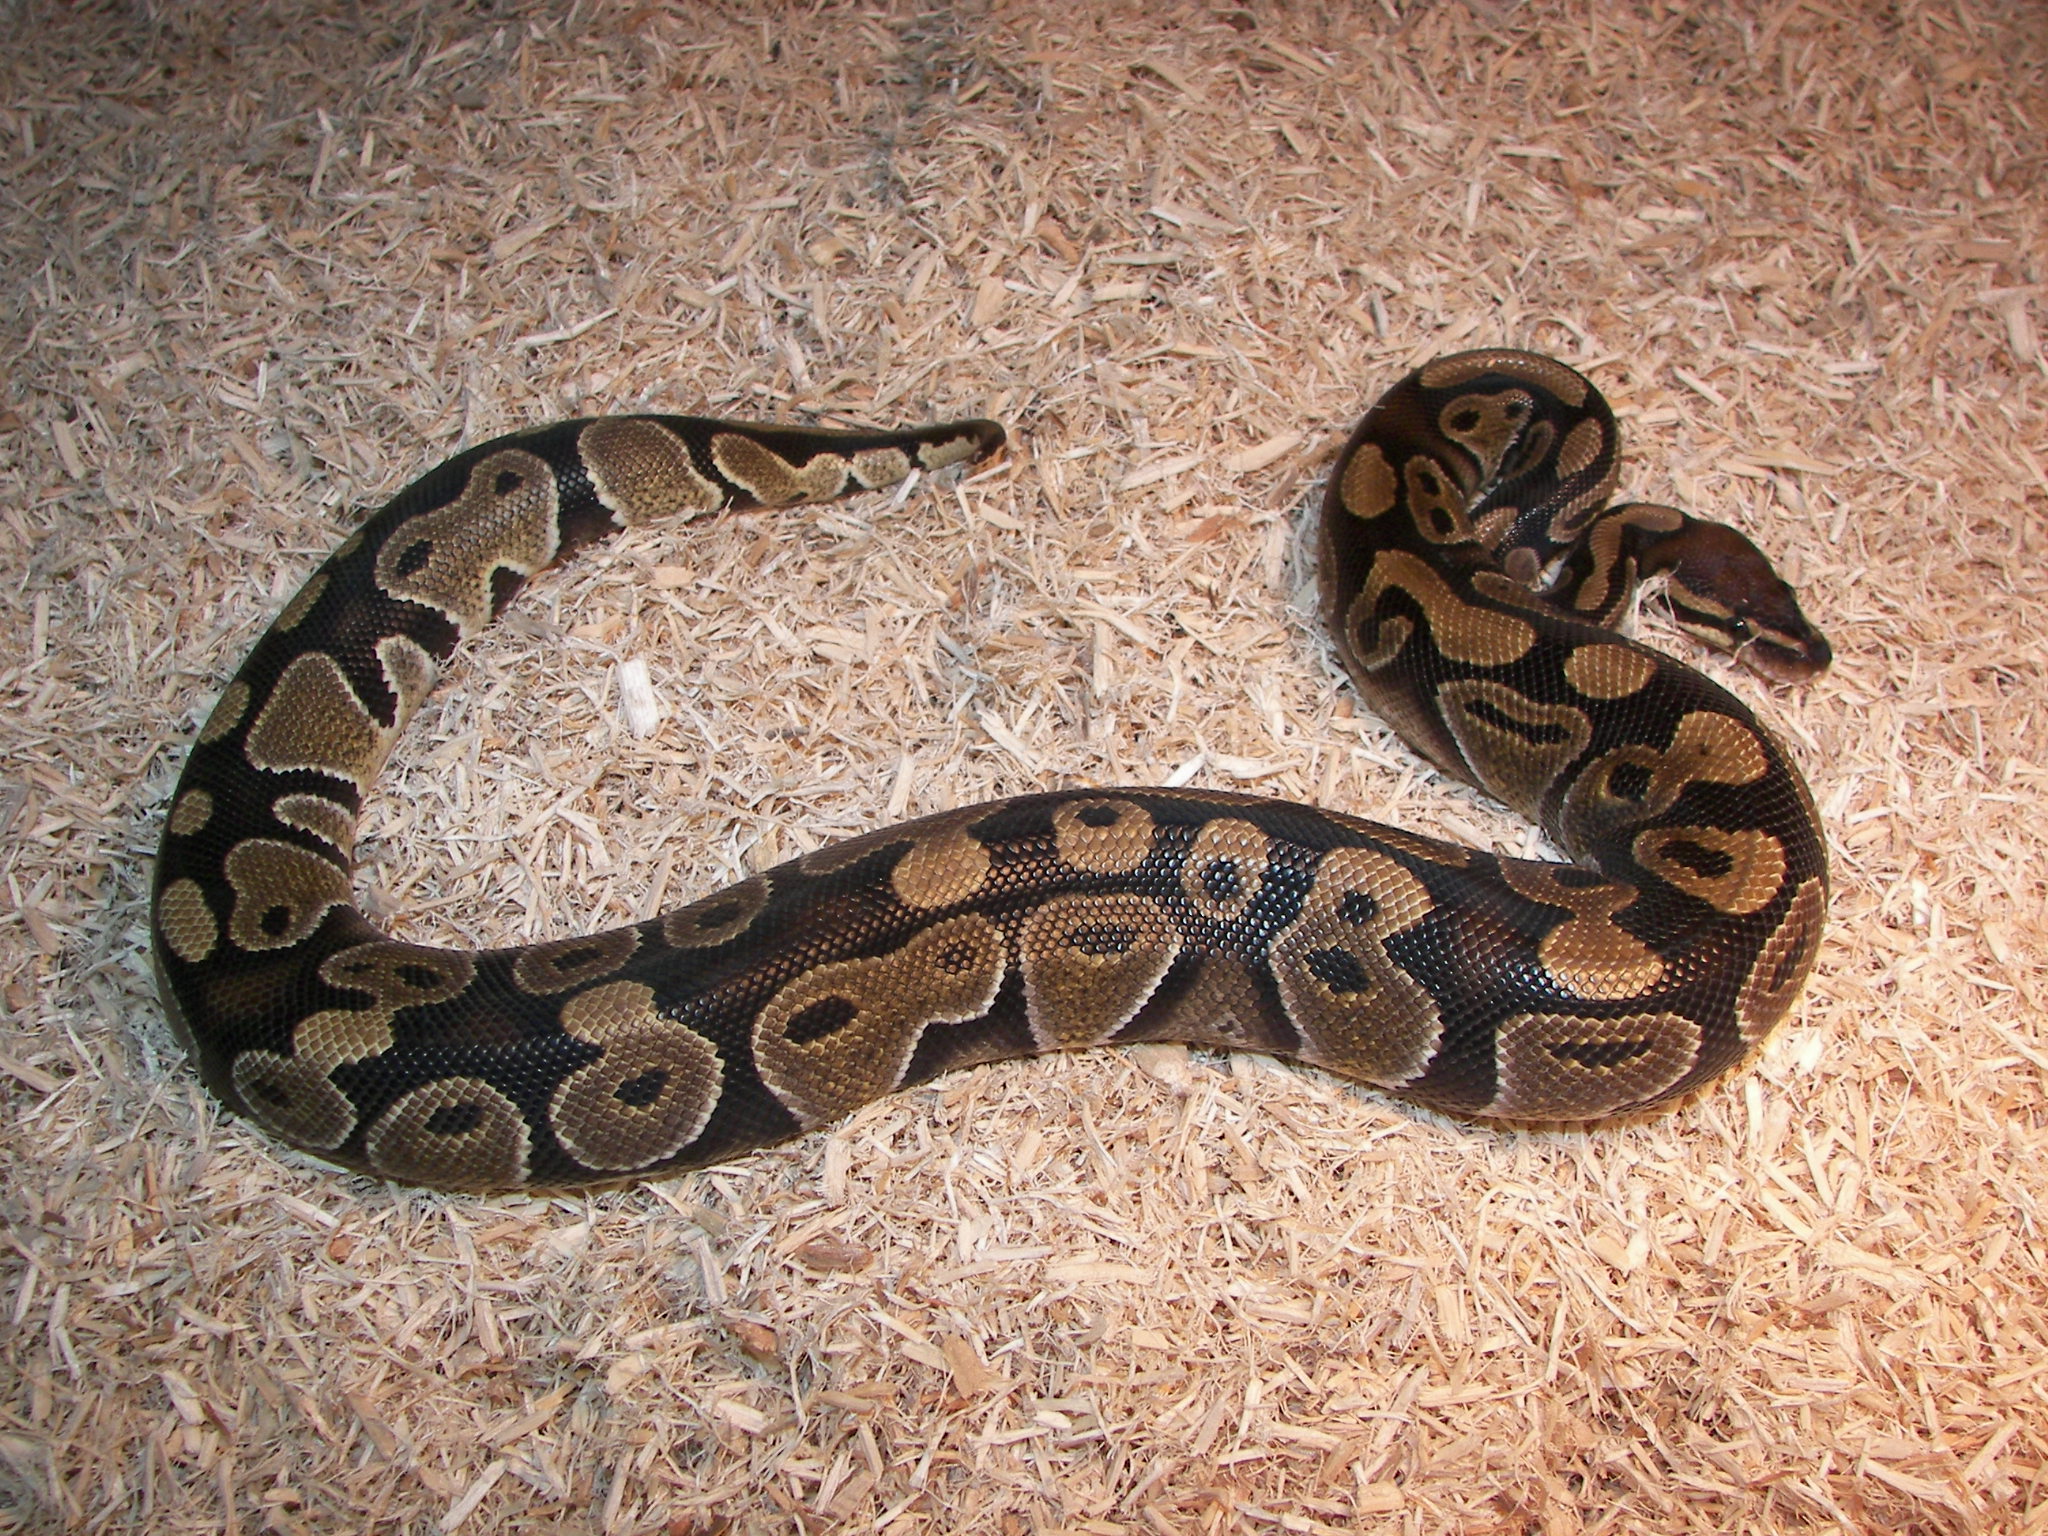 the ball python is sitting on the floor